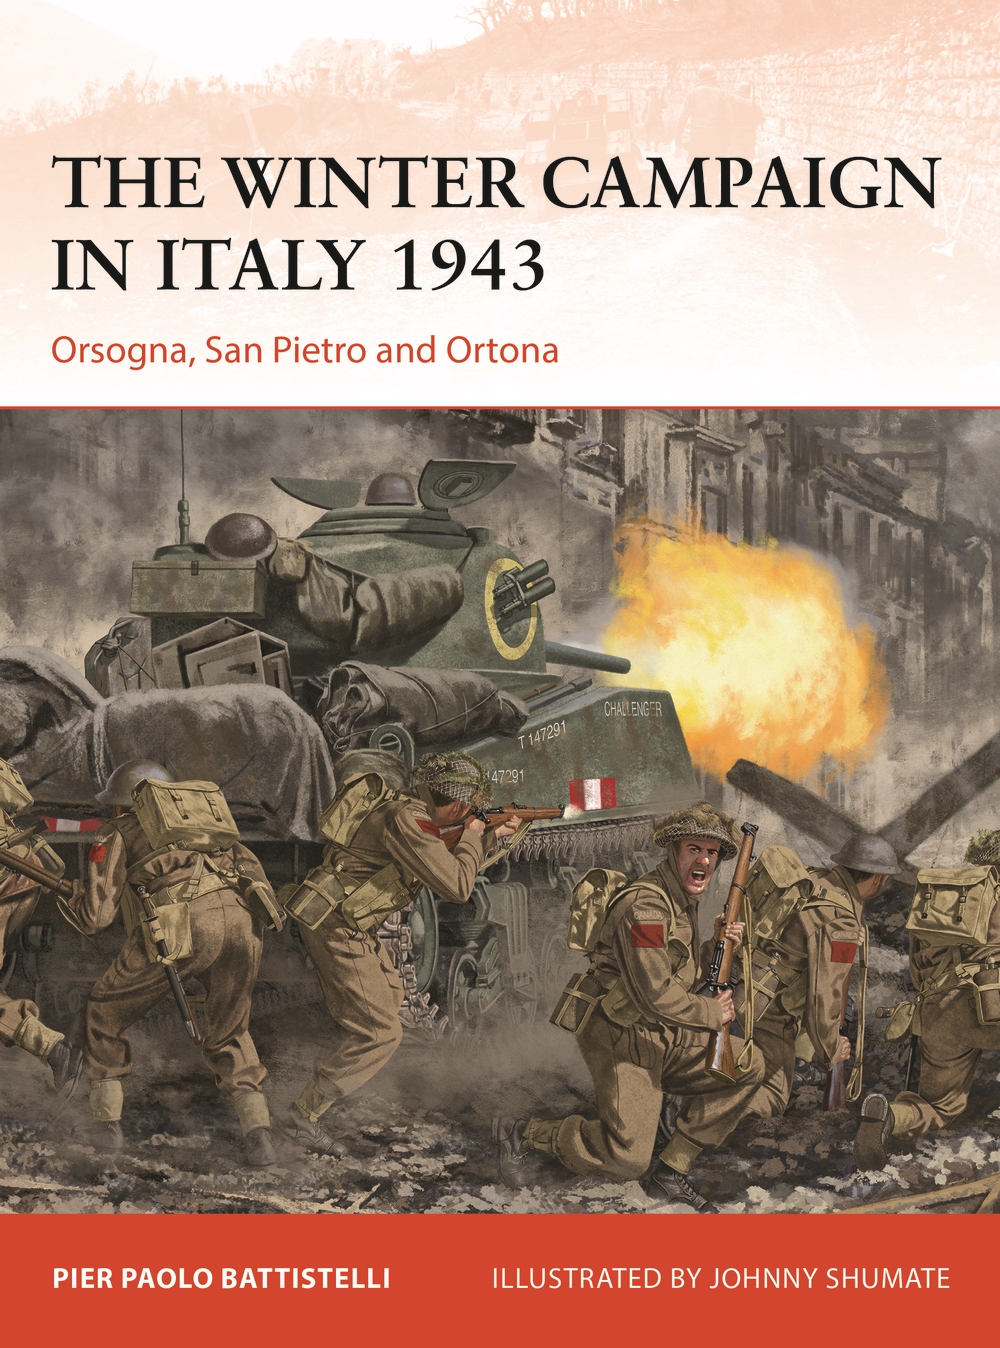 Winter Campaign in Italy 1943 book jacket